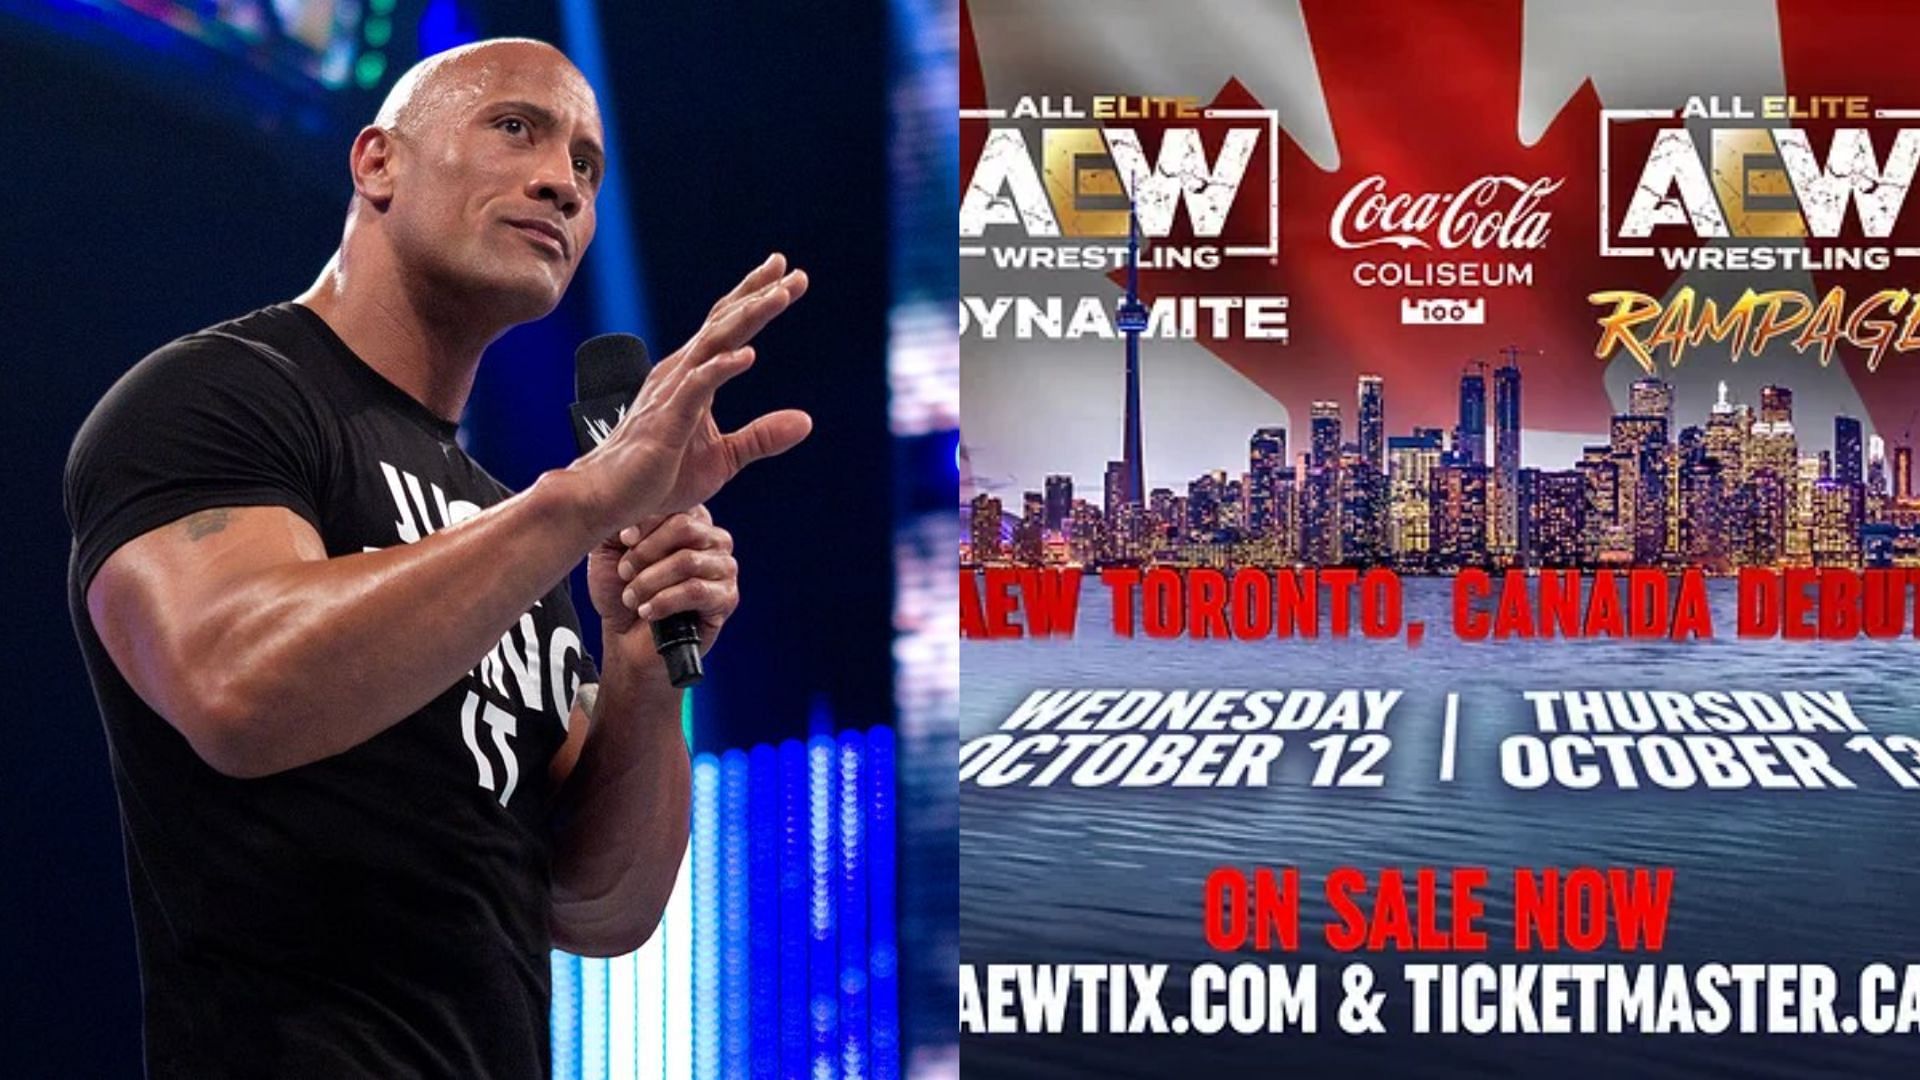 An AEW has invited The Rock to hang out in Canada